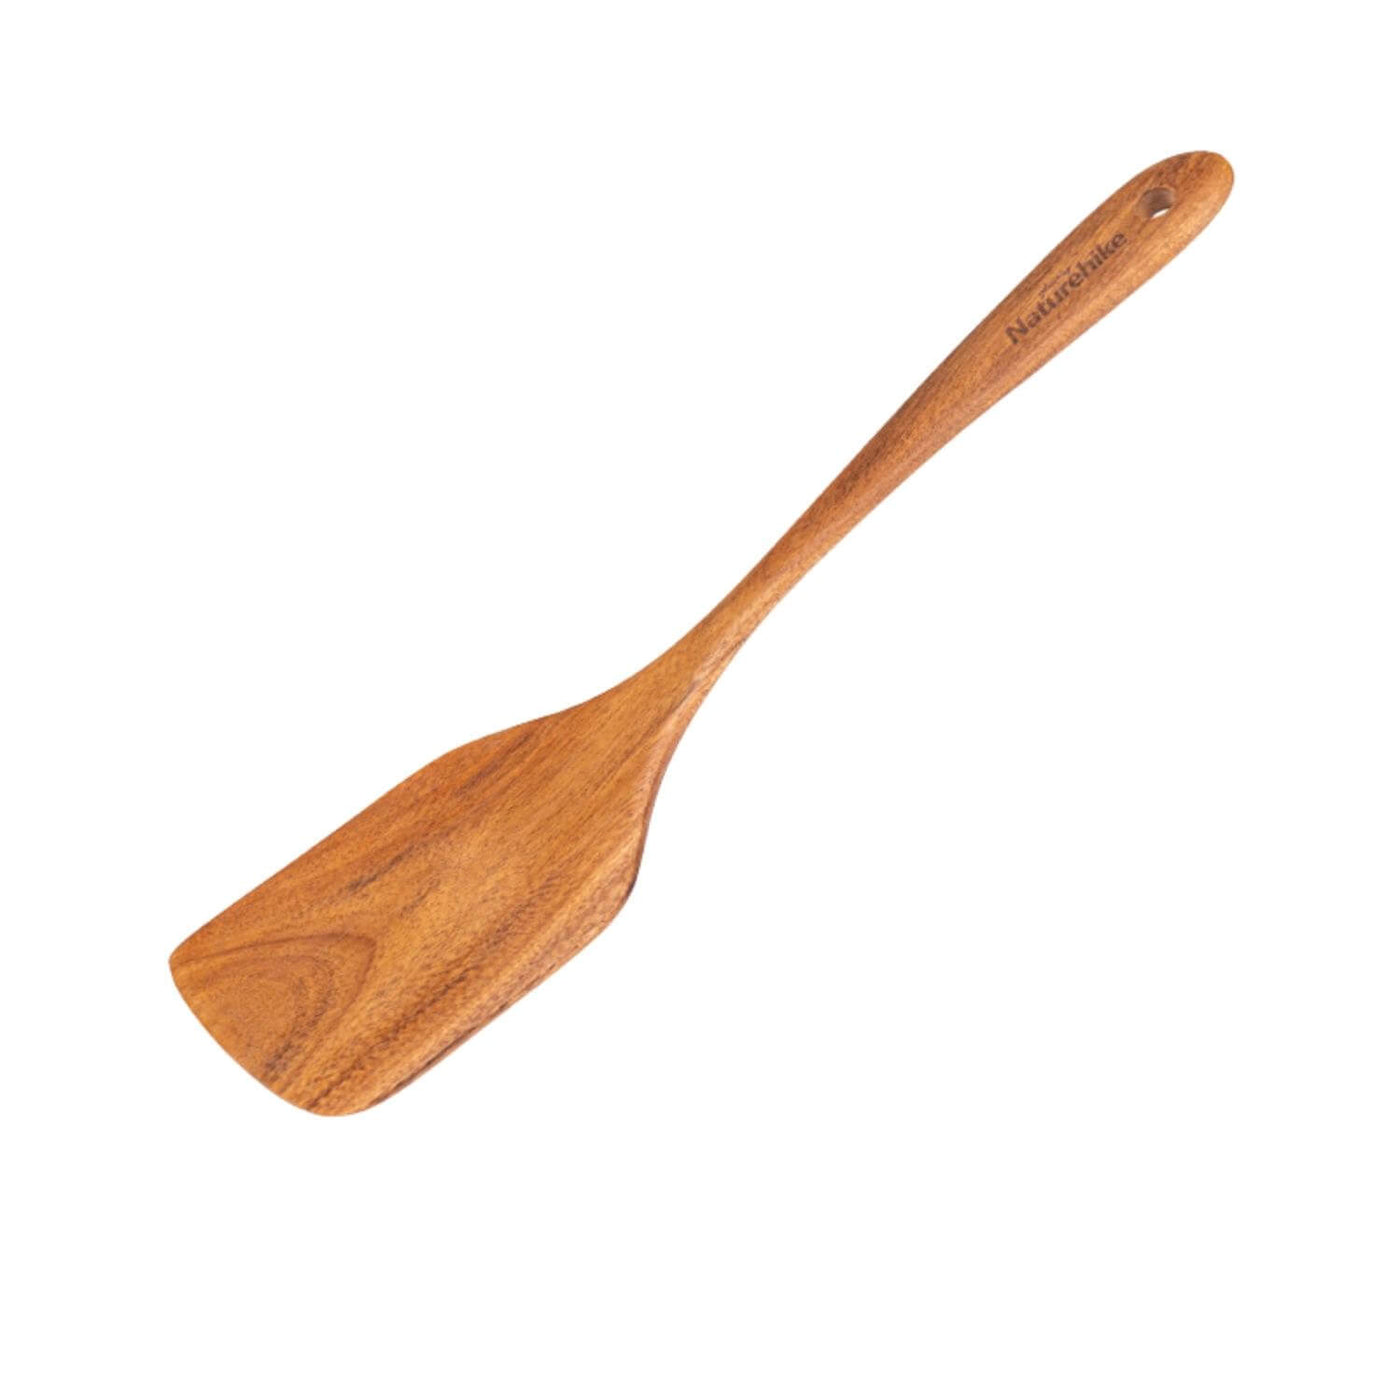 Solid wood spoons